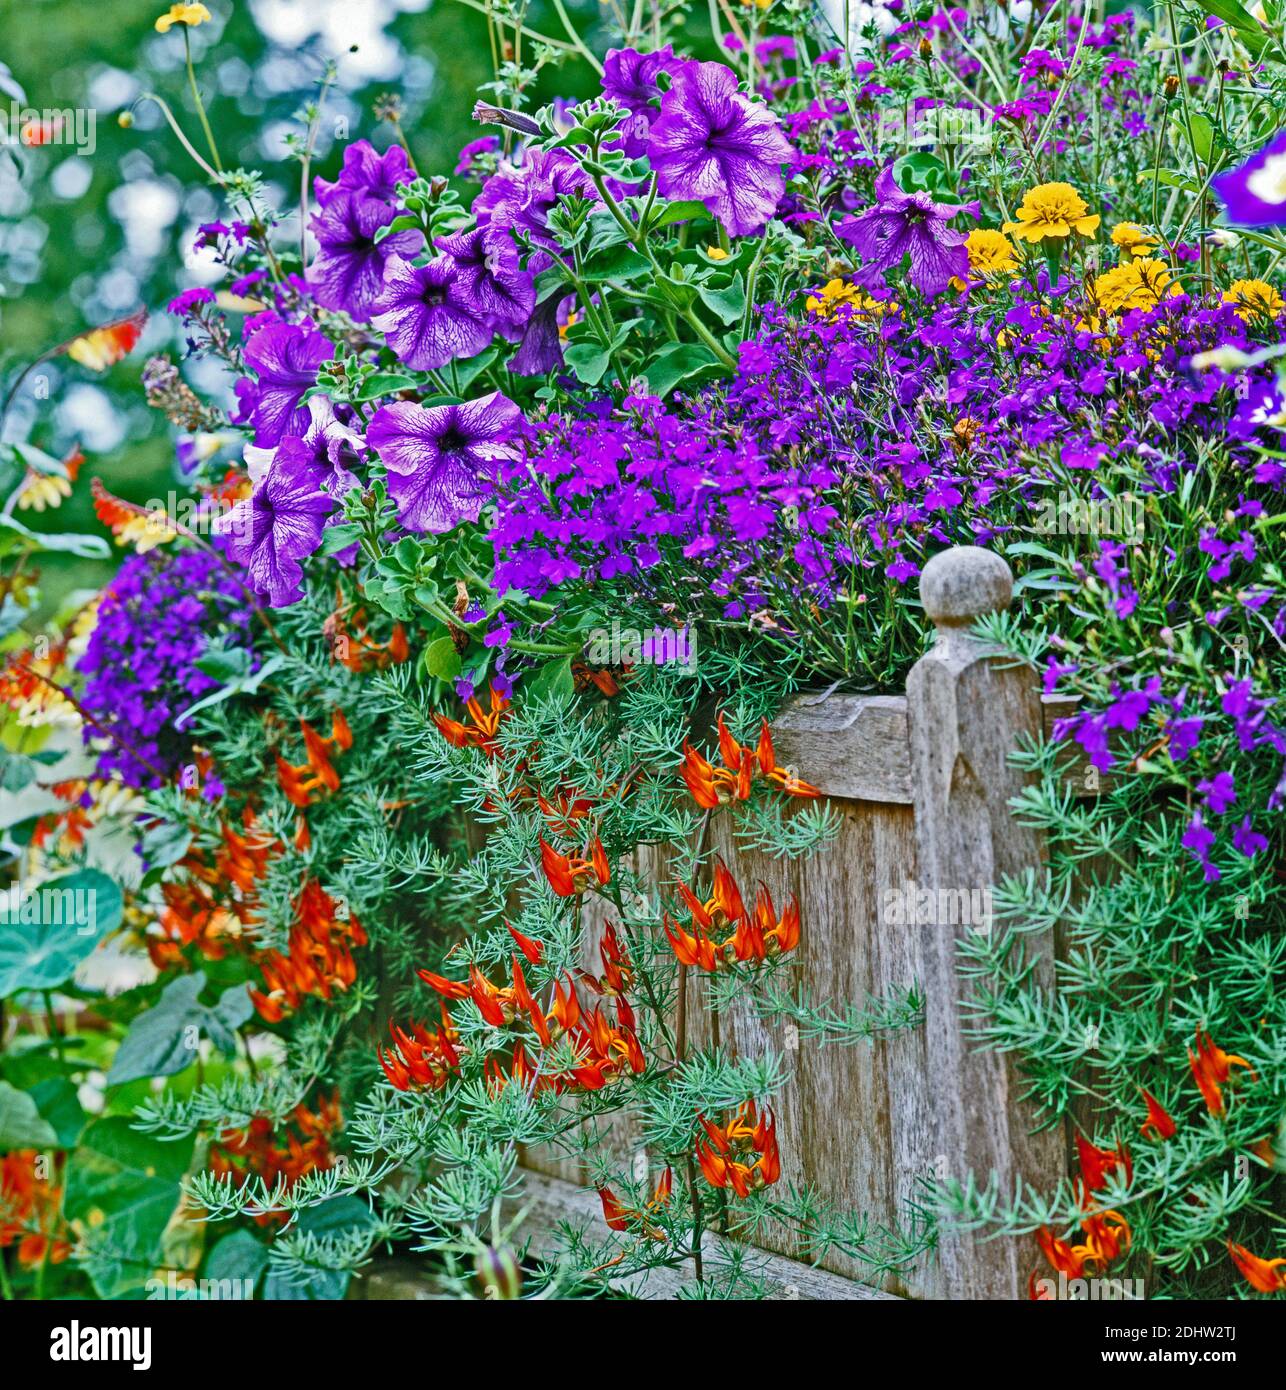 Planted wooden container with colourful display of flowers Stock Photo